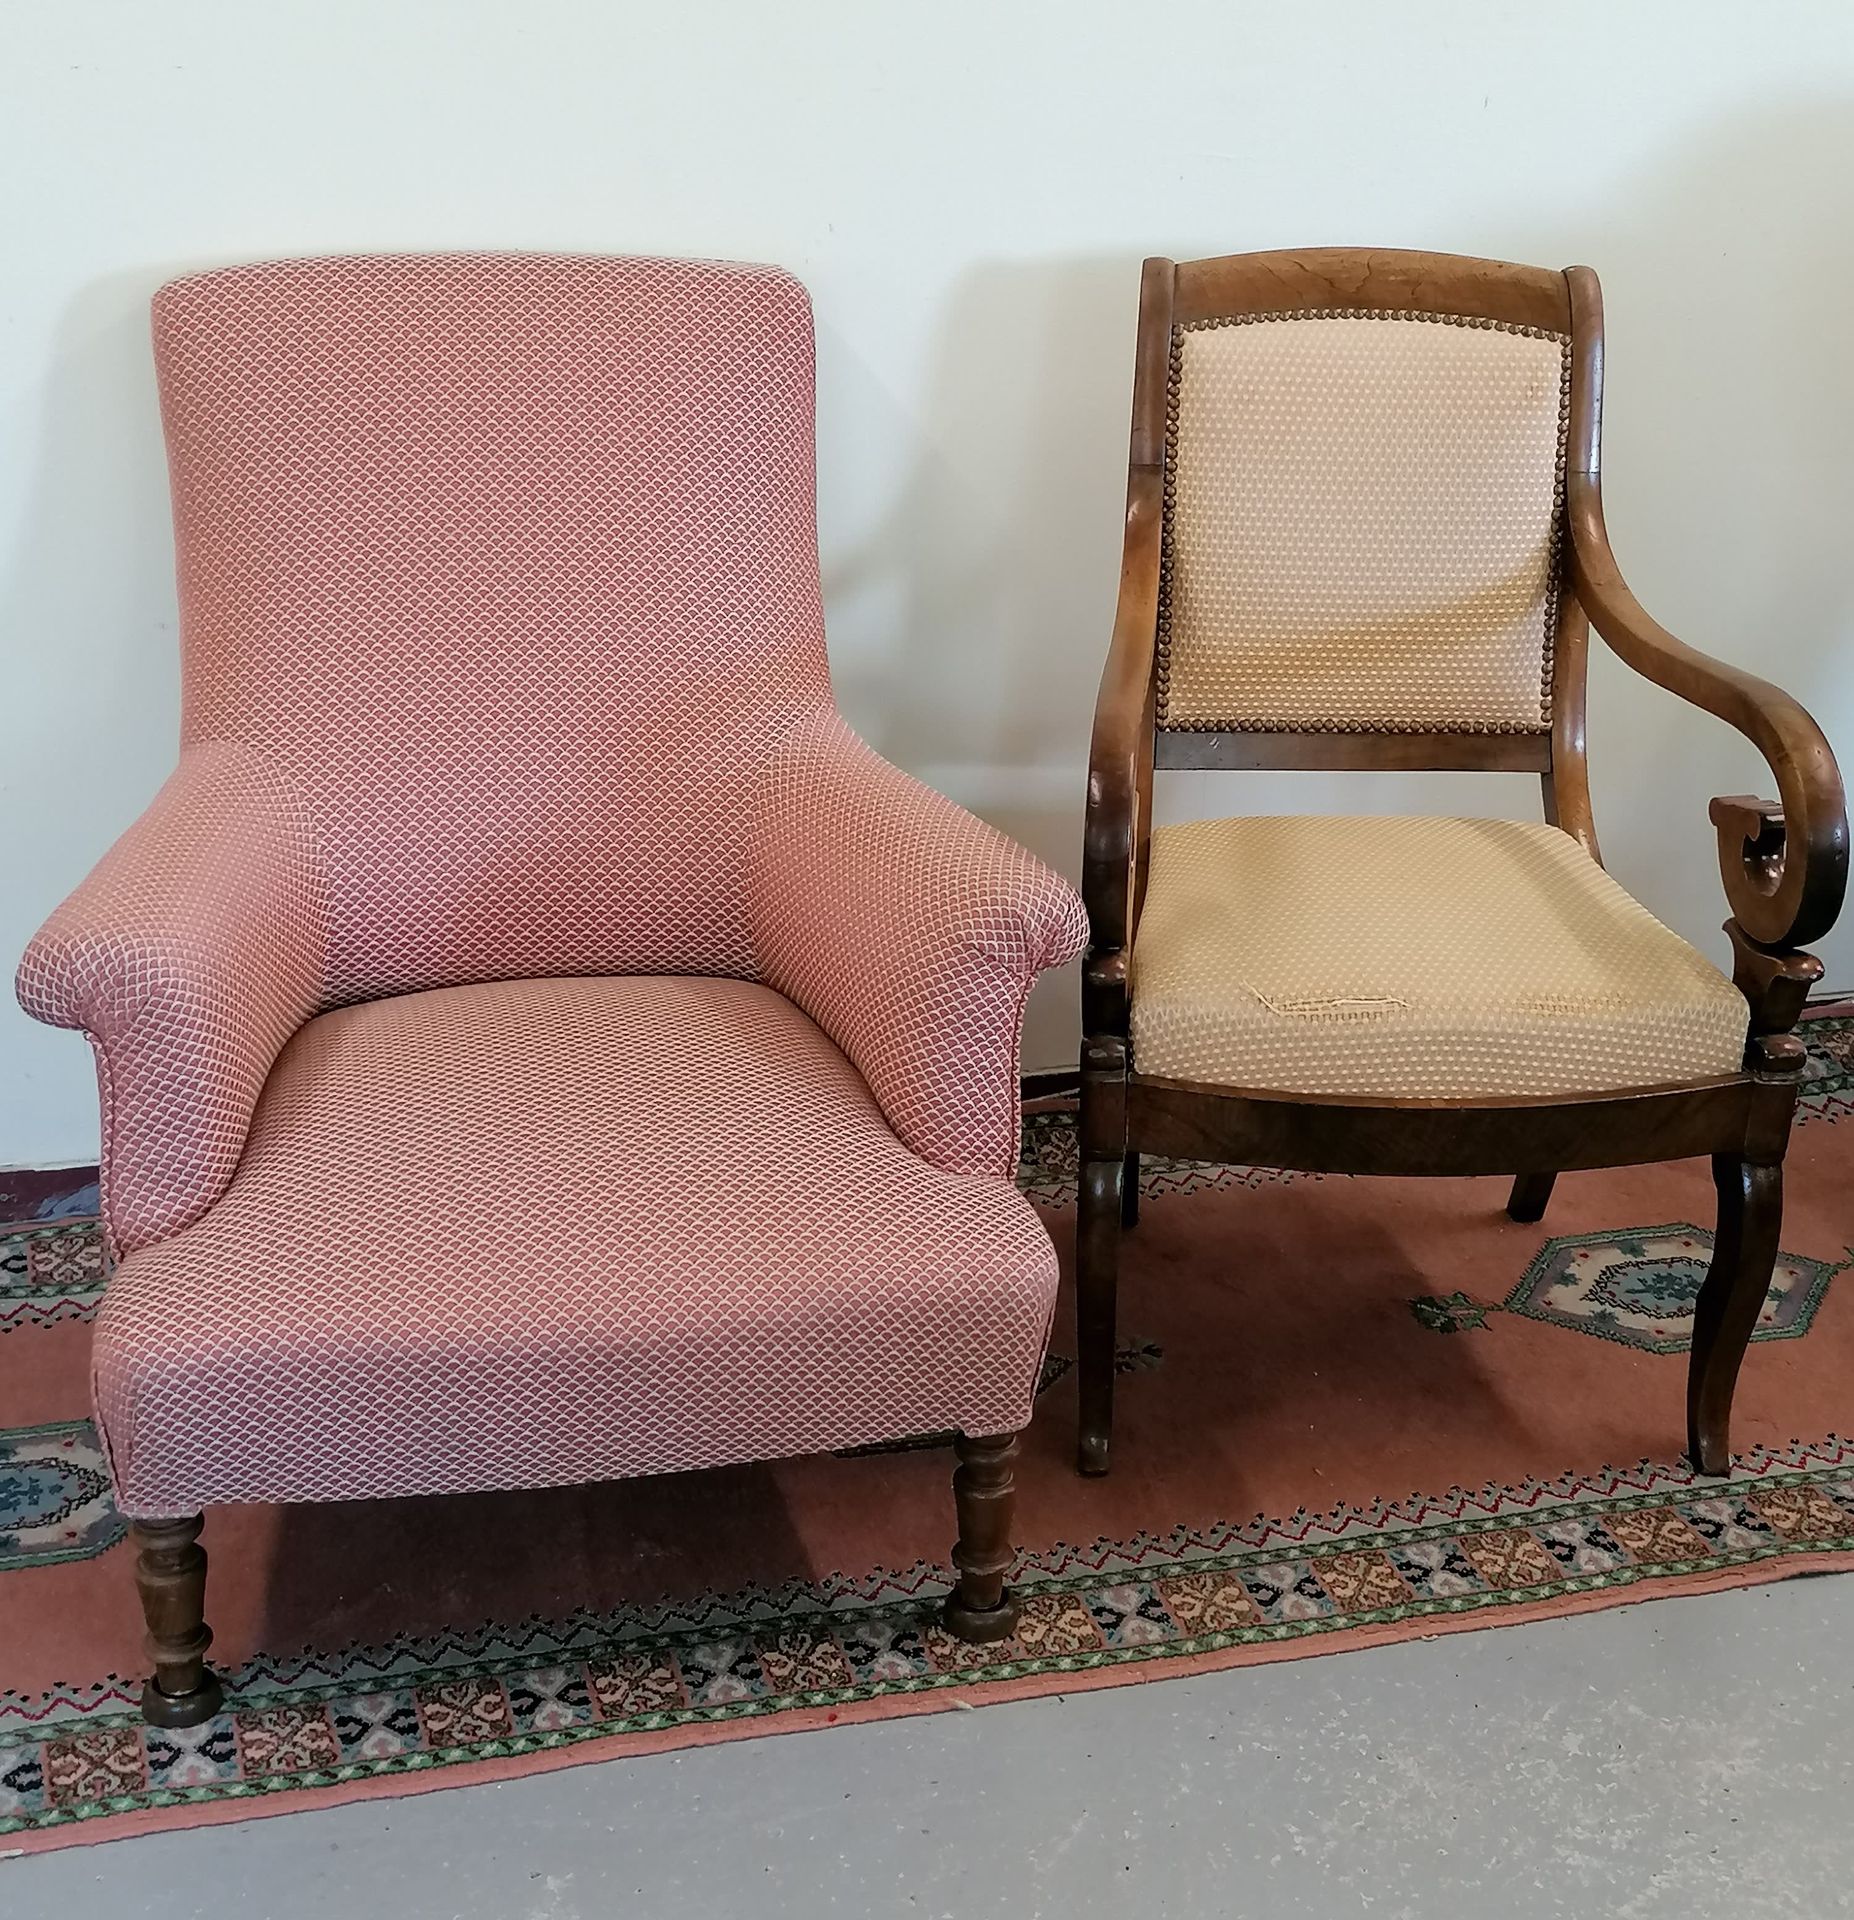 Null A set of TWO CHAIRS

A napoleon III armchair nicely covered 

A desk chair &hellip;